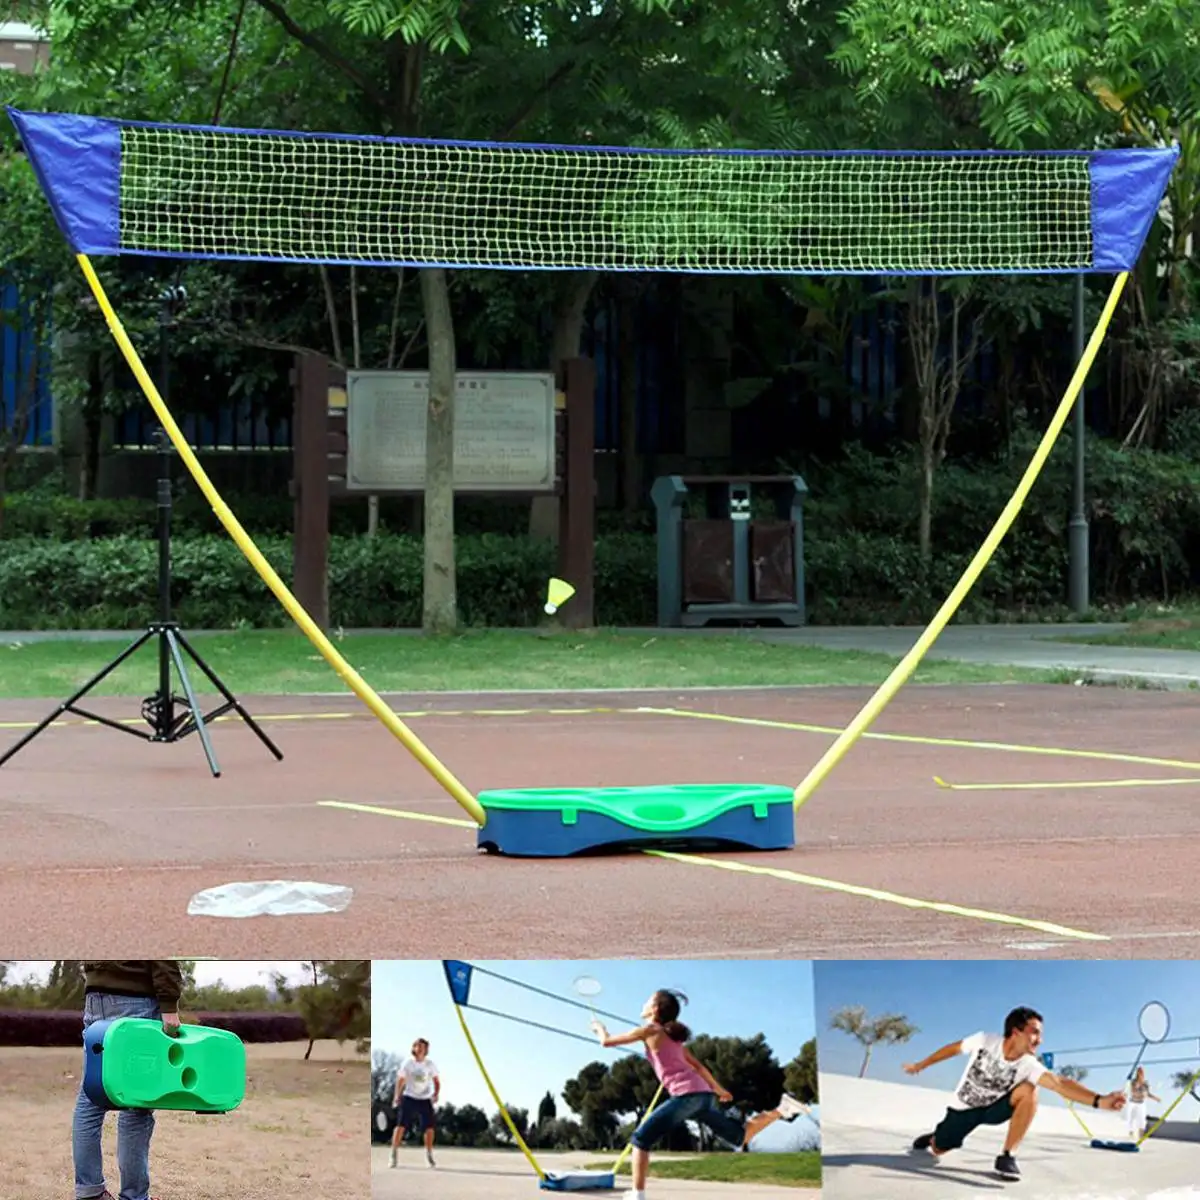 

3 in 1 Outdoor Sport Badminton Tennis Volleyball Net Portable Battledore Stand Set Net Frame Supporting Stand Storage Case